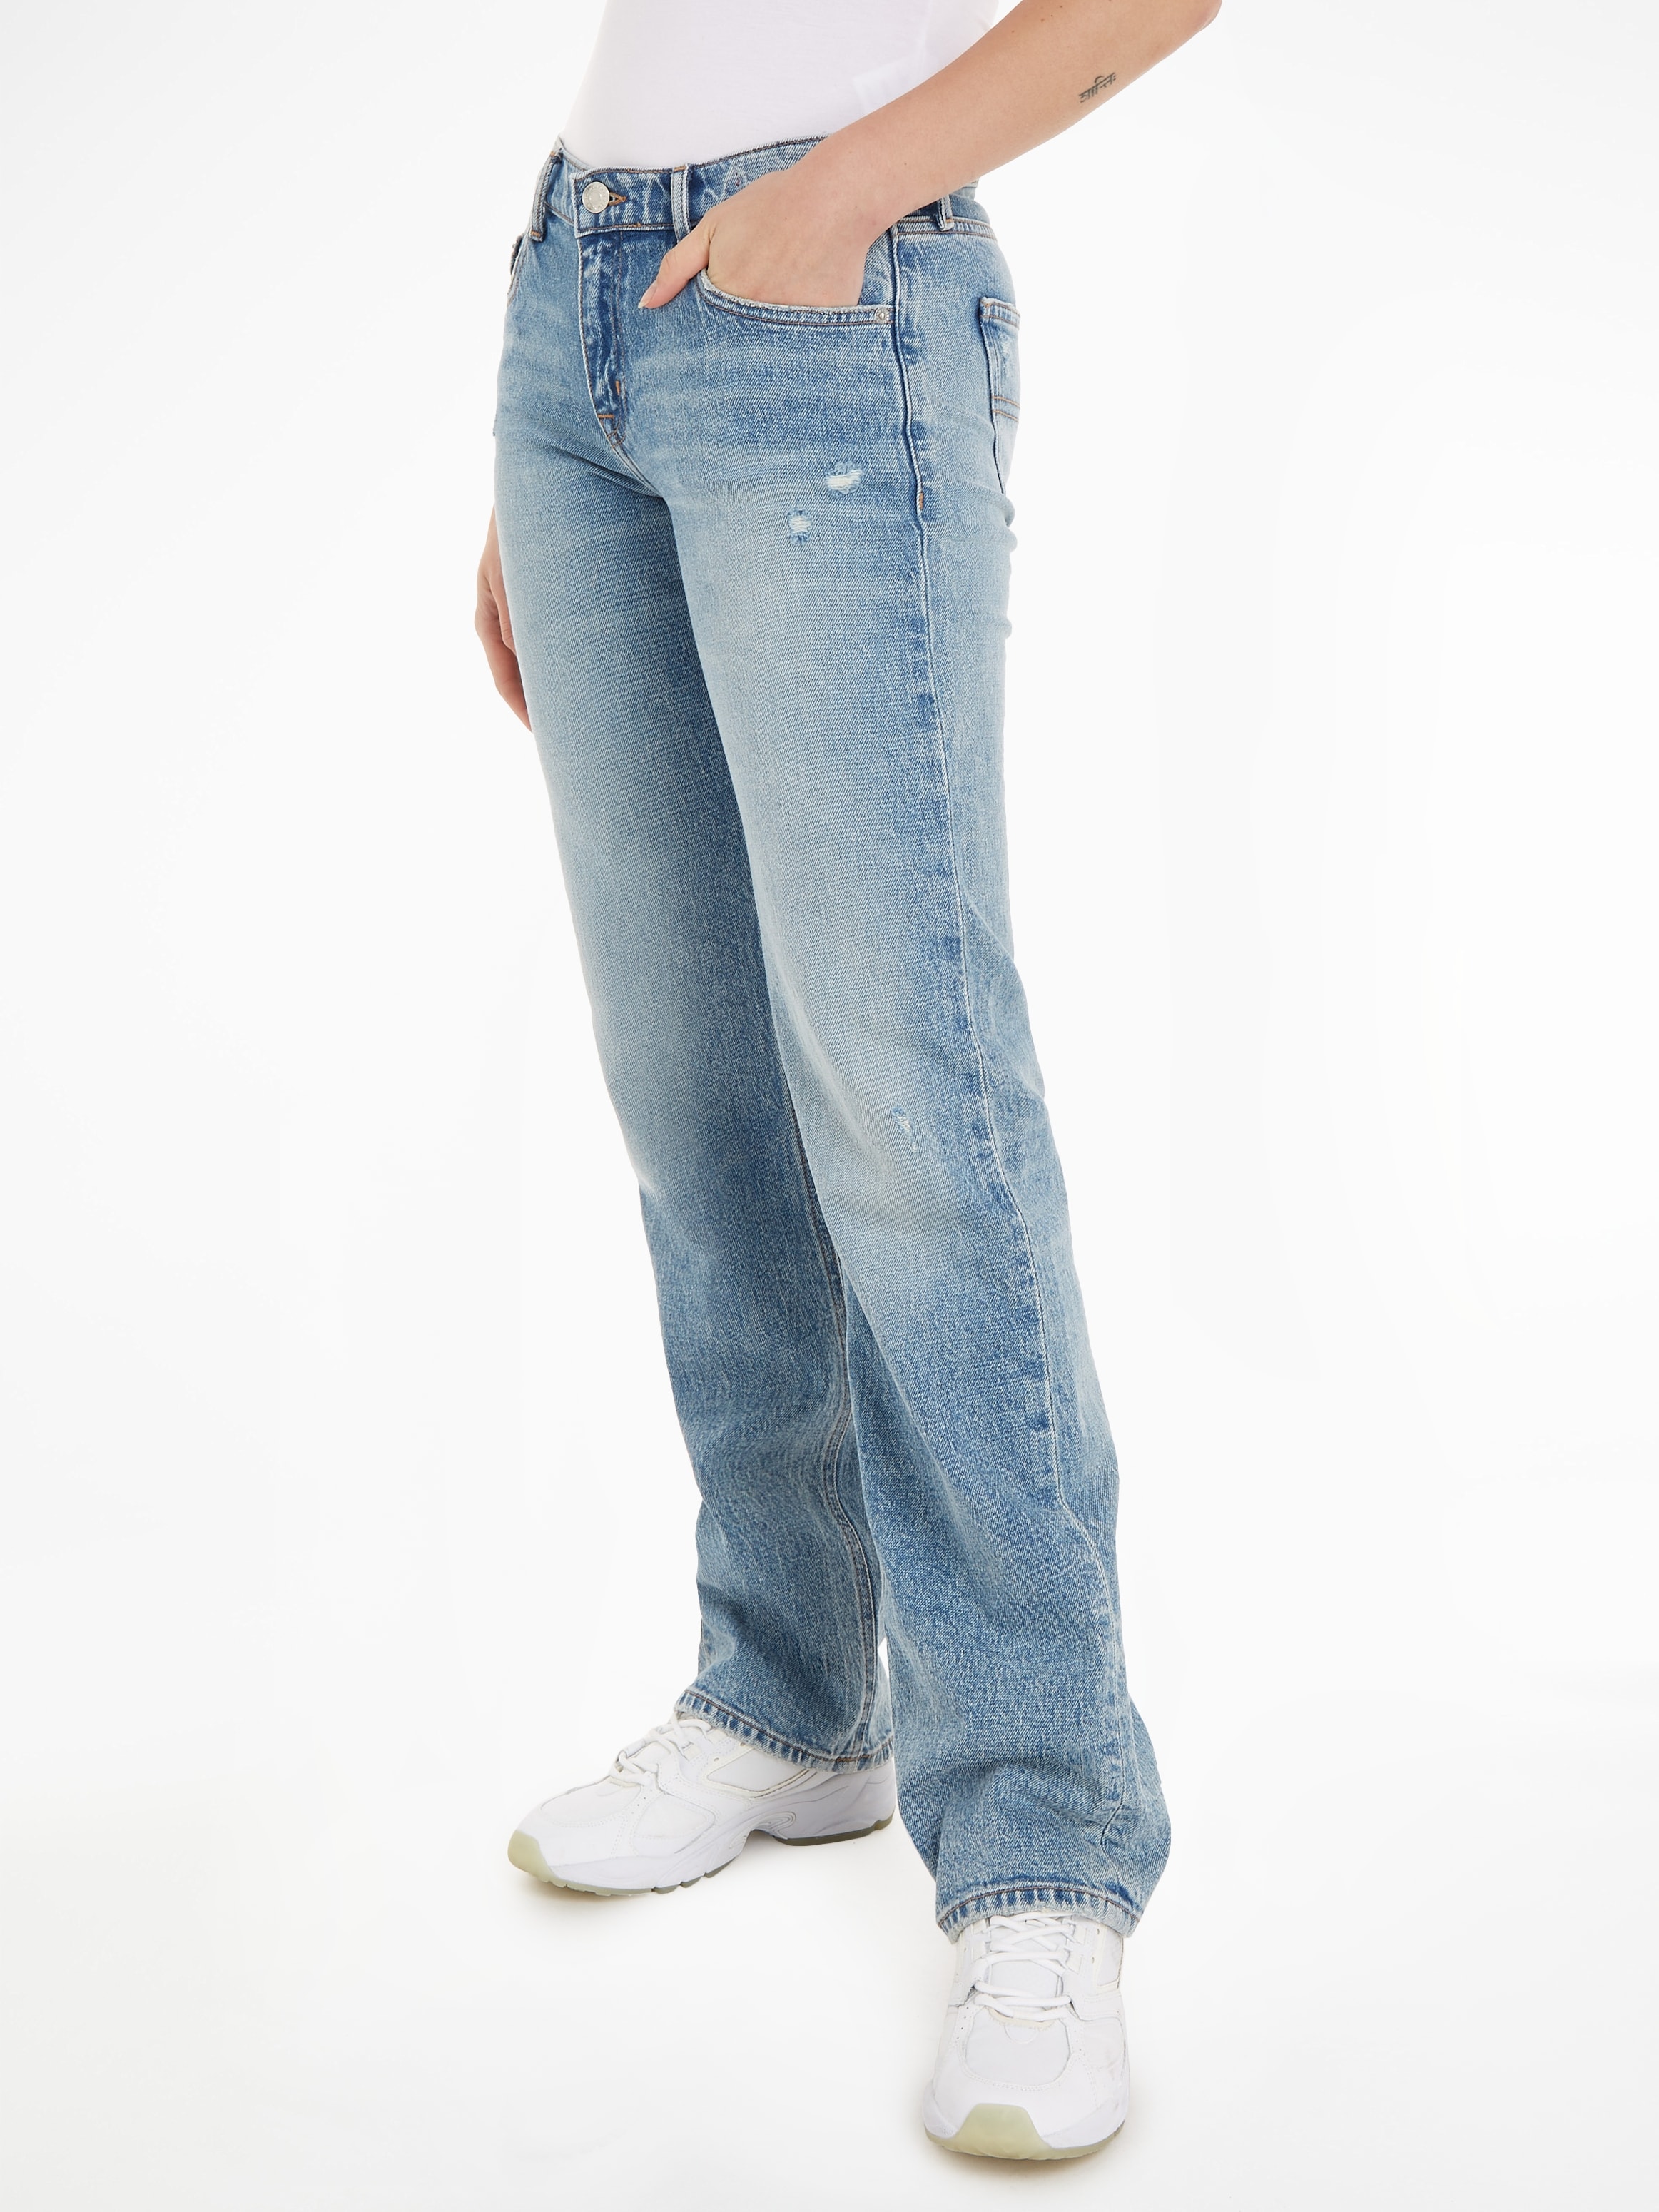 Tommy Jeans Straight-Jeans, mit und Labelflags OTTO Logobadge bei